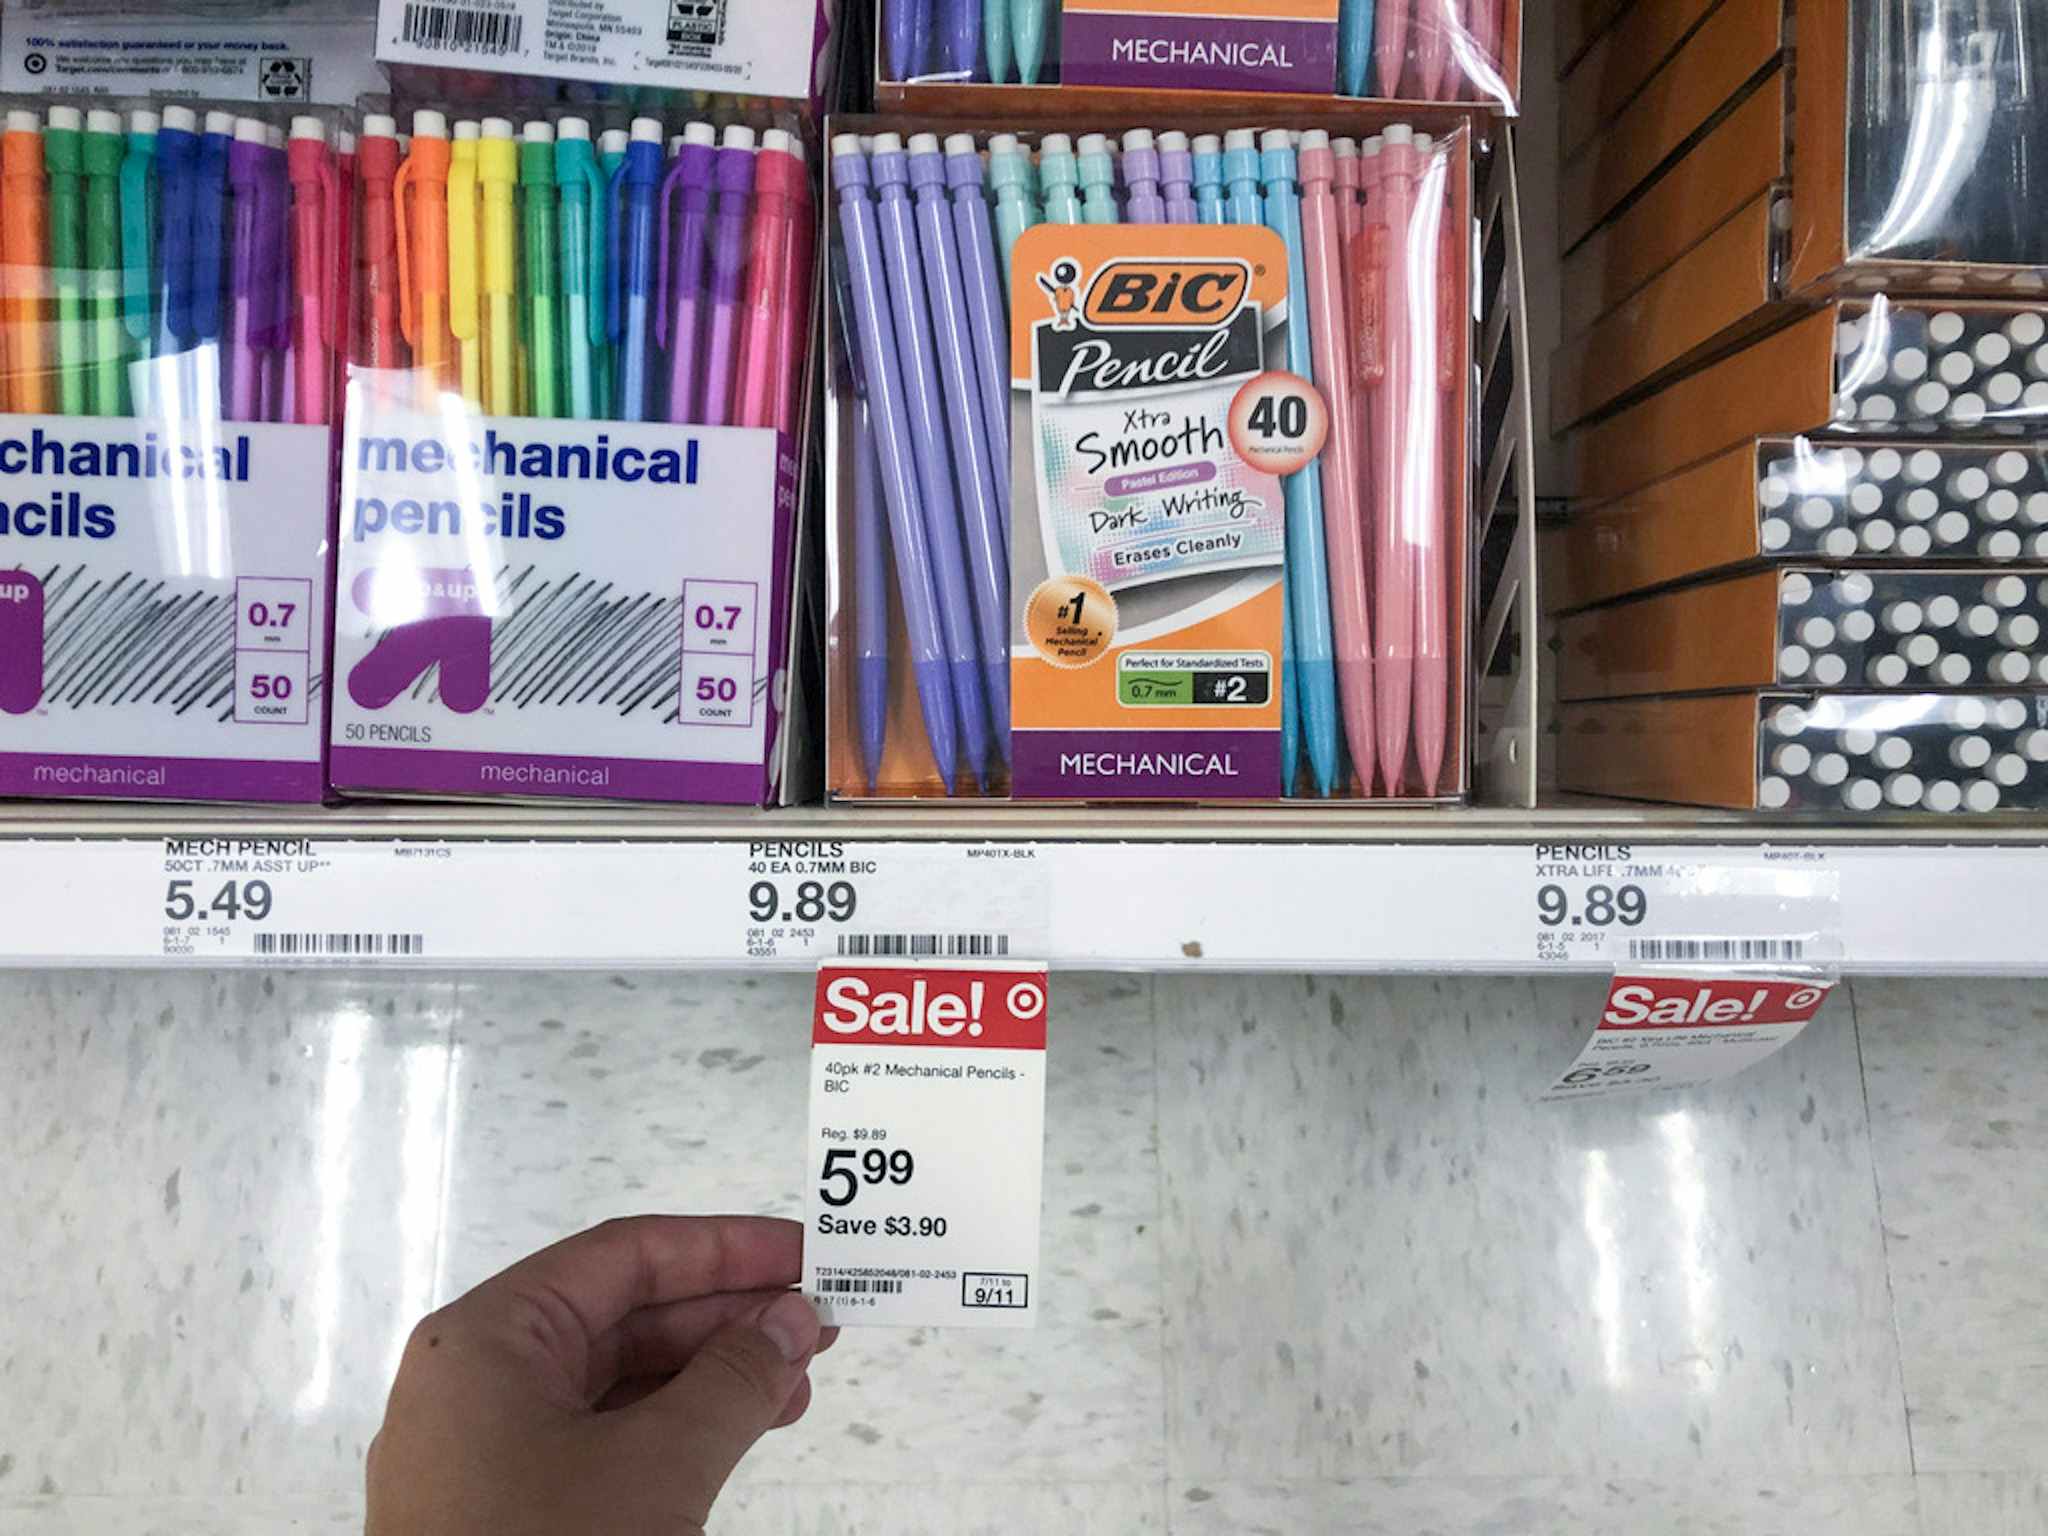 bic mechanical pencils 40-count at target